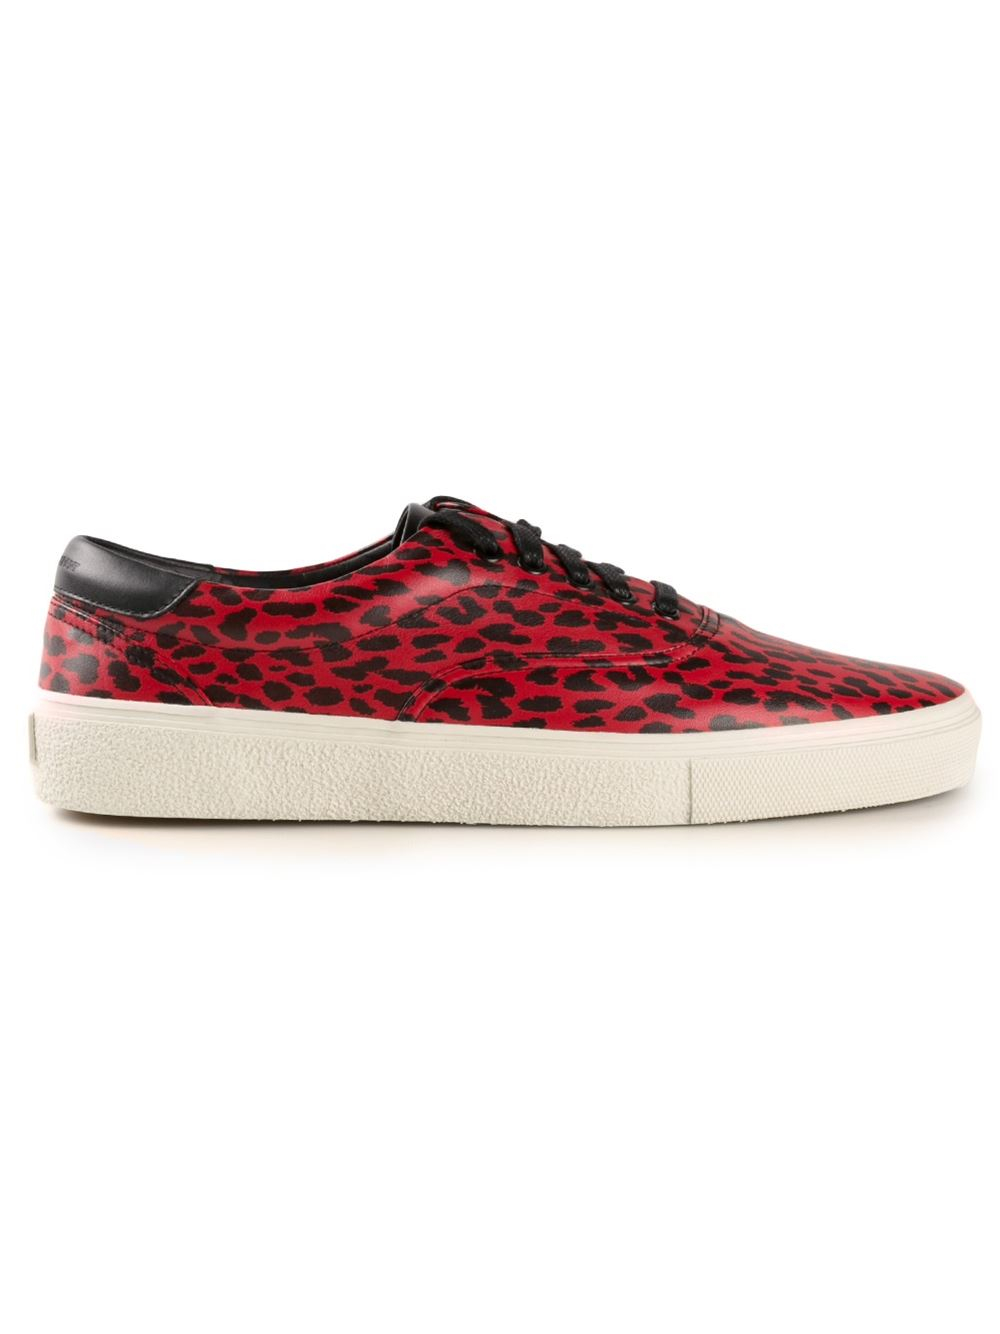 Saint Laurent Leopard Print Trainers in Red for Men - Lyst